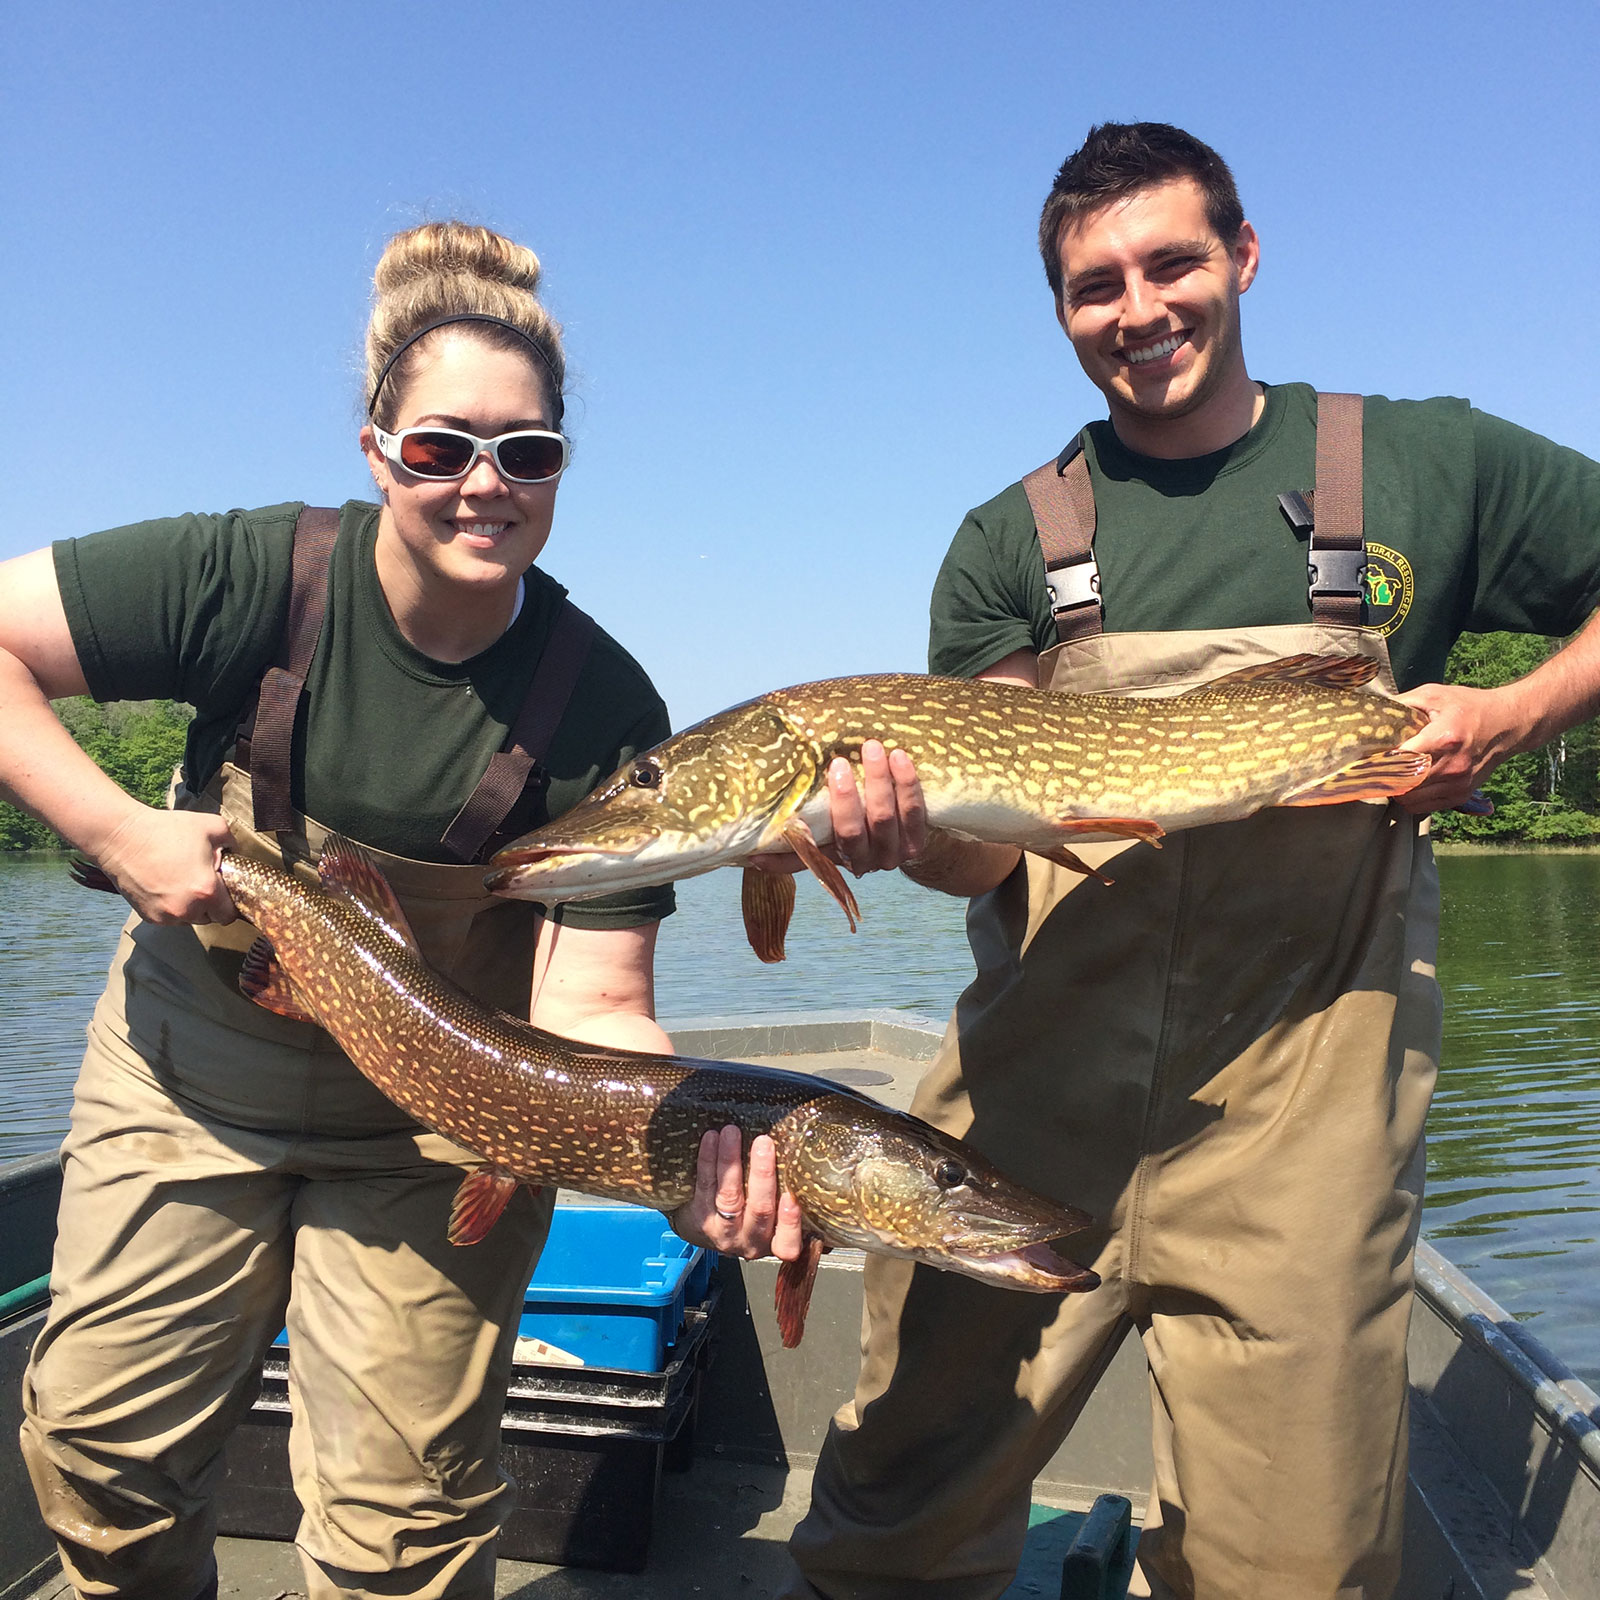 Call of the wild spurs West Michigan woman to become one of Michigan’s leading experts on managing fisheries